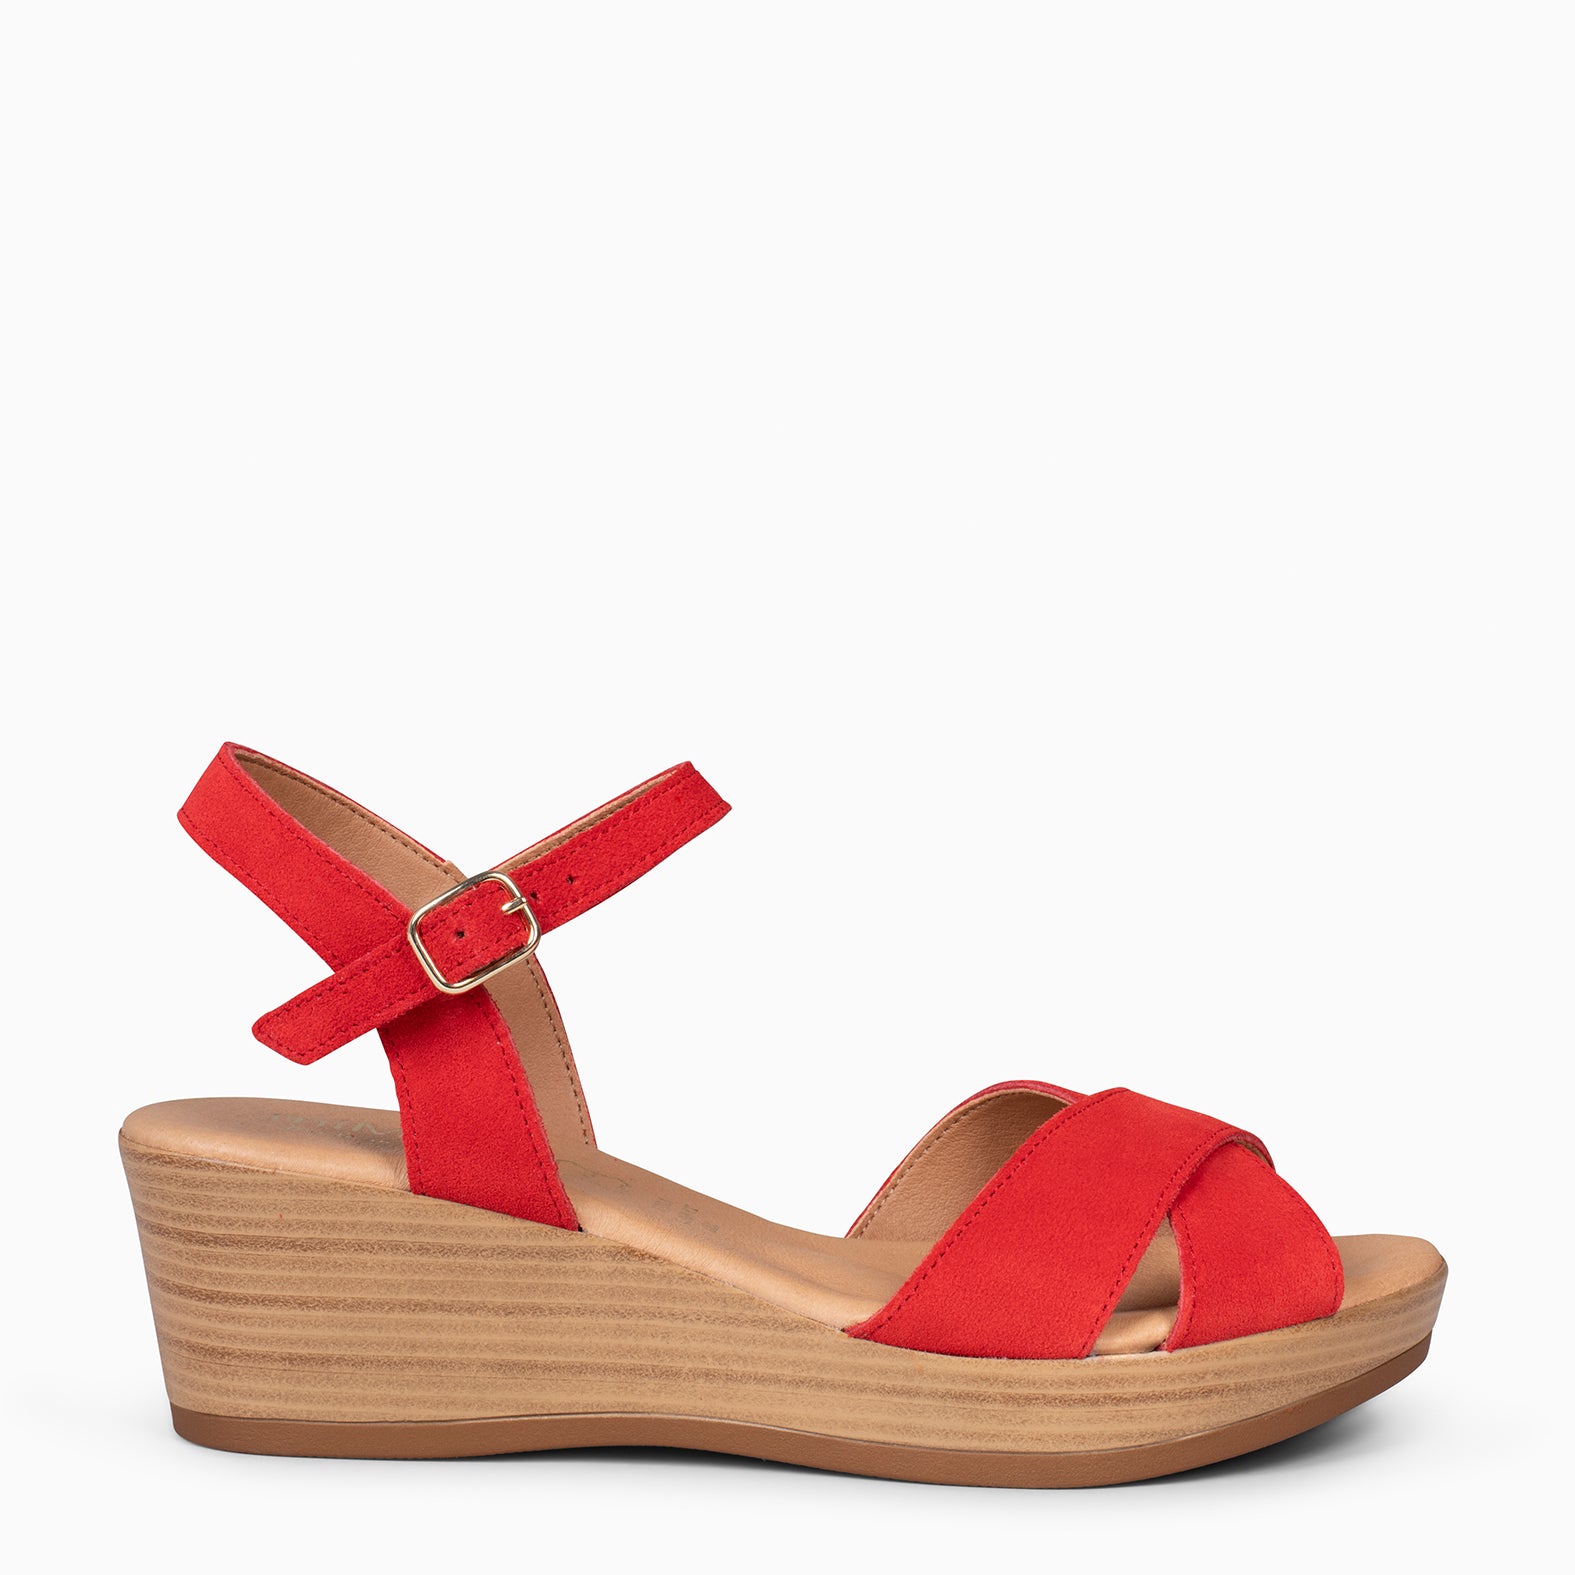 MAR – RED WEDGE SHOES